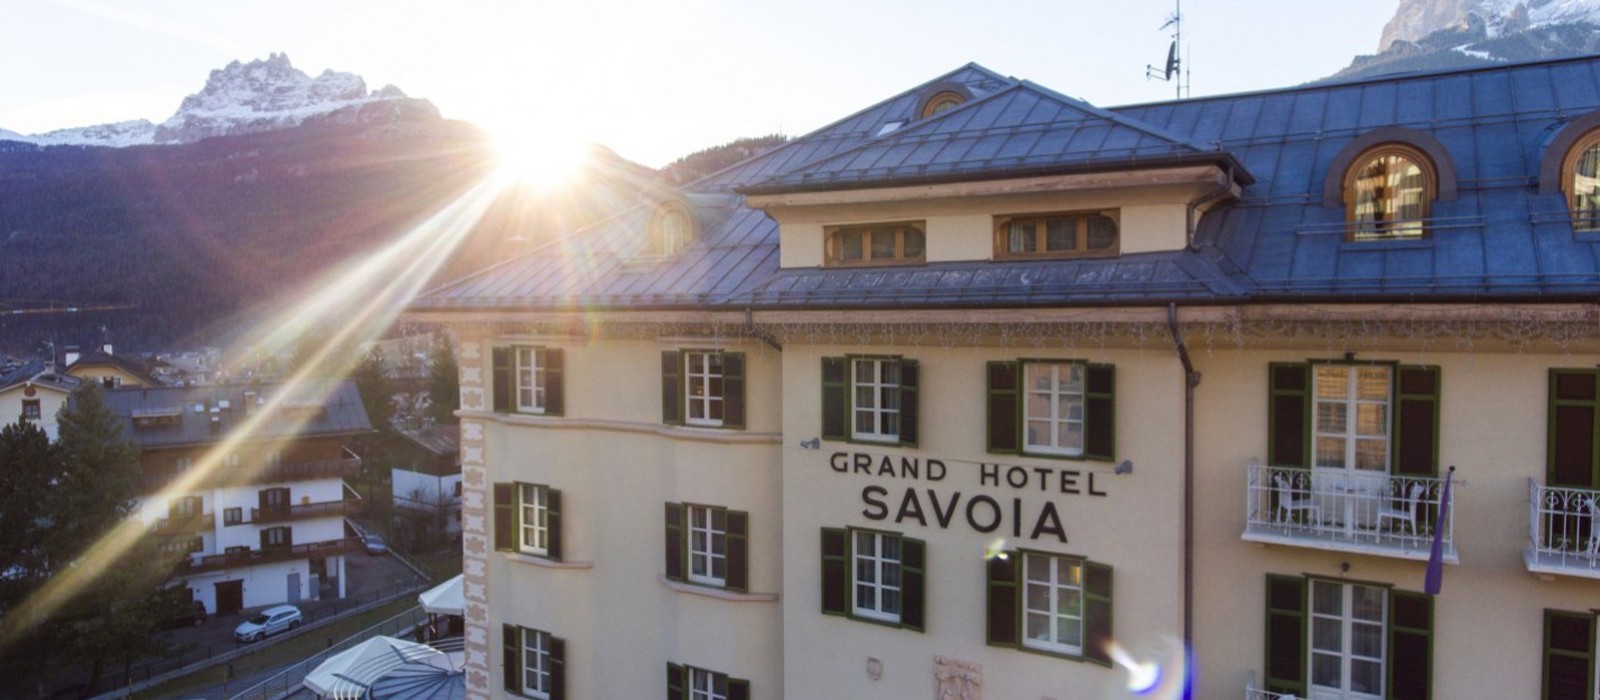 HEADER - grand hotel savoia - luxury italy holiday packages